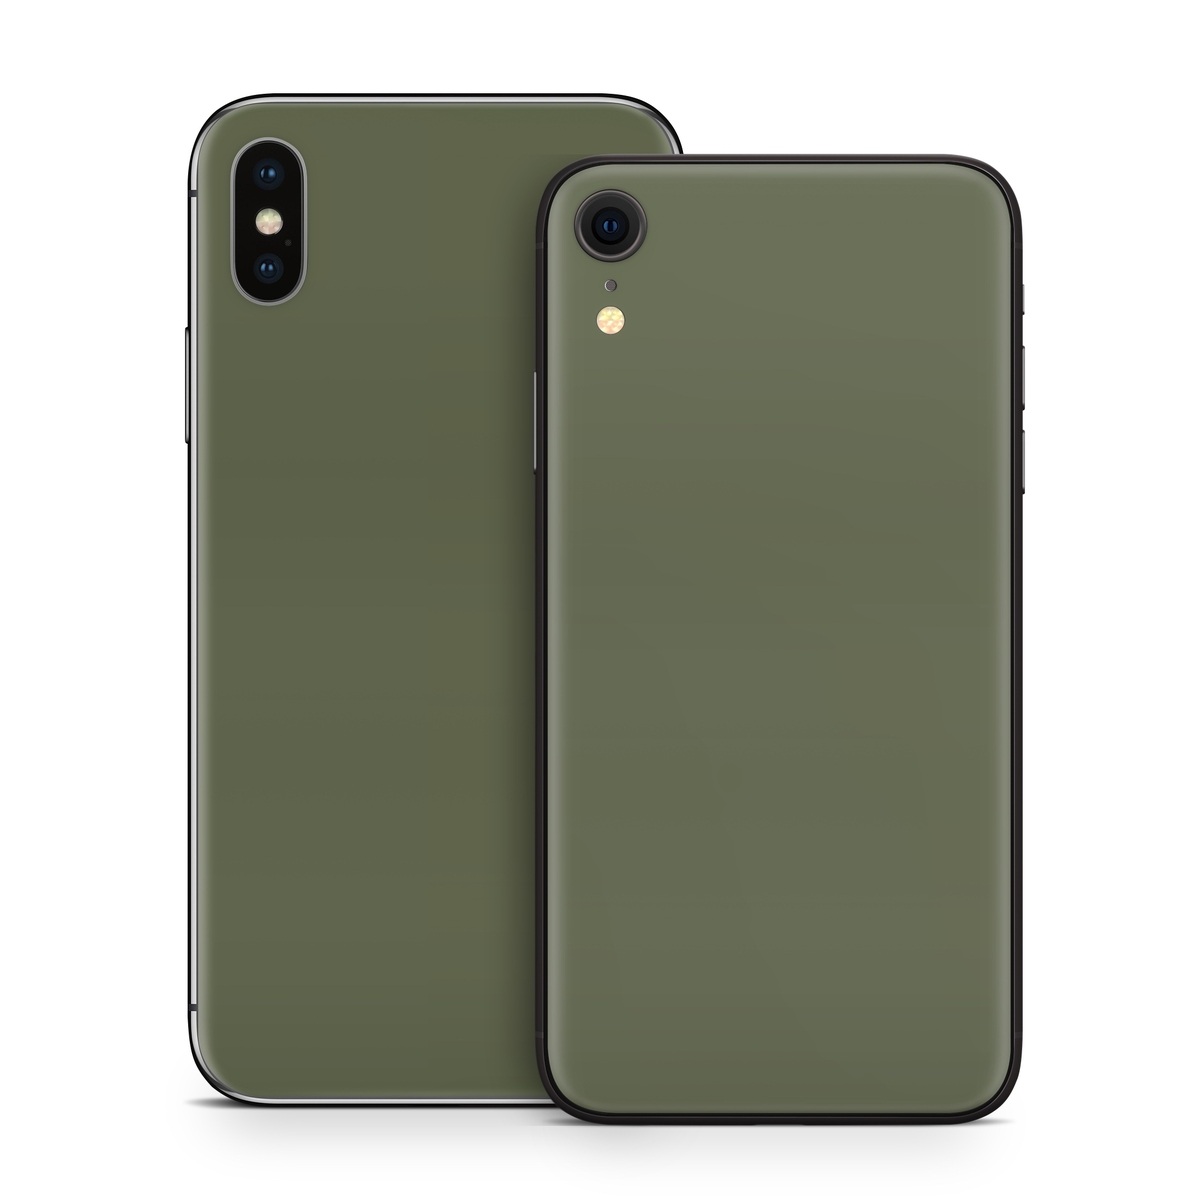 Apple iPhone X Skin - Solid State Olive Drab (Image 1)